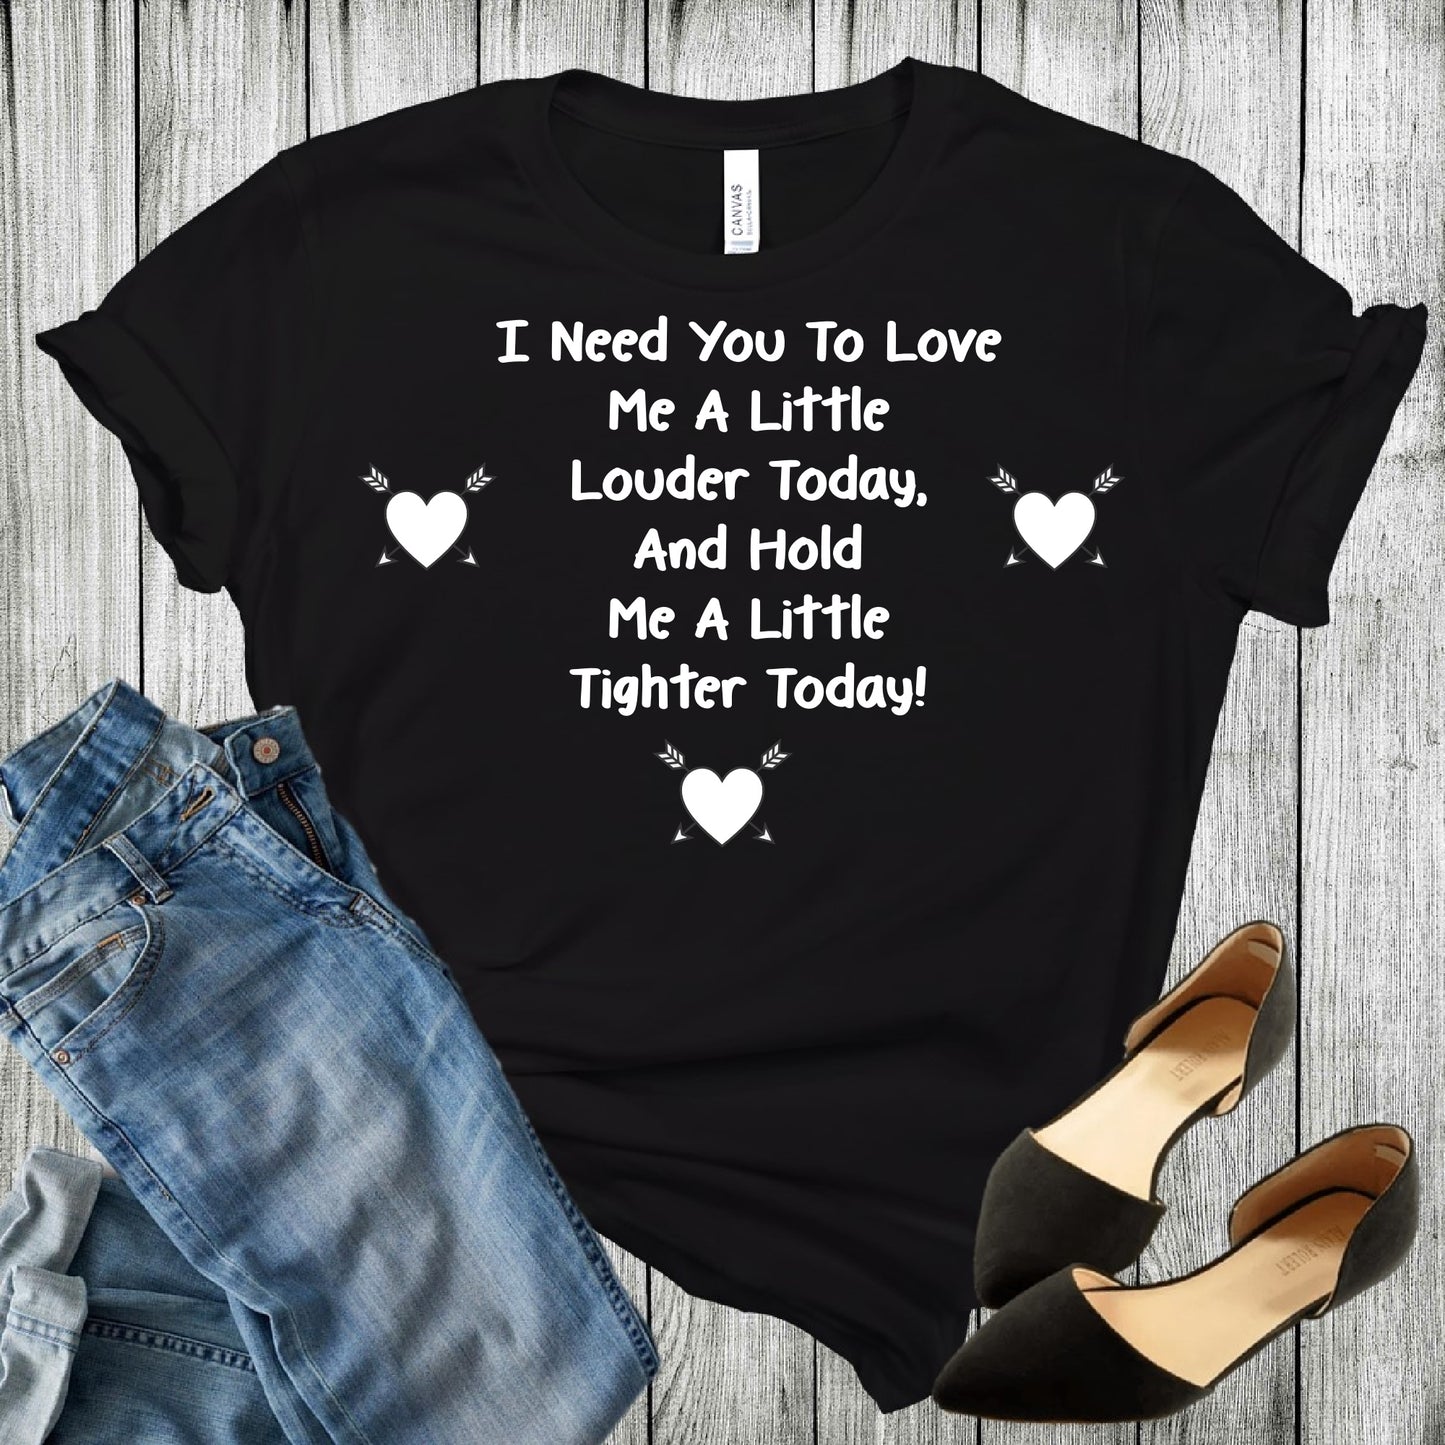 Grit City Rebel Black Tshirt with white writing saying I need you to love me a little louder tody, and hold me a little tighter today! sizing small to 3X